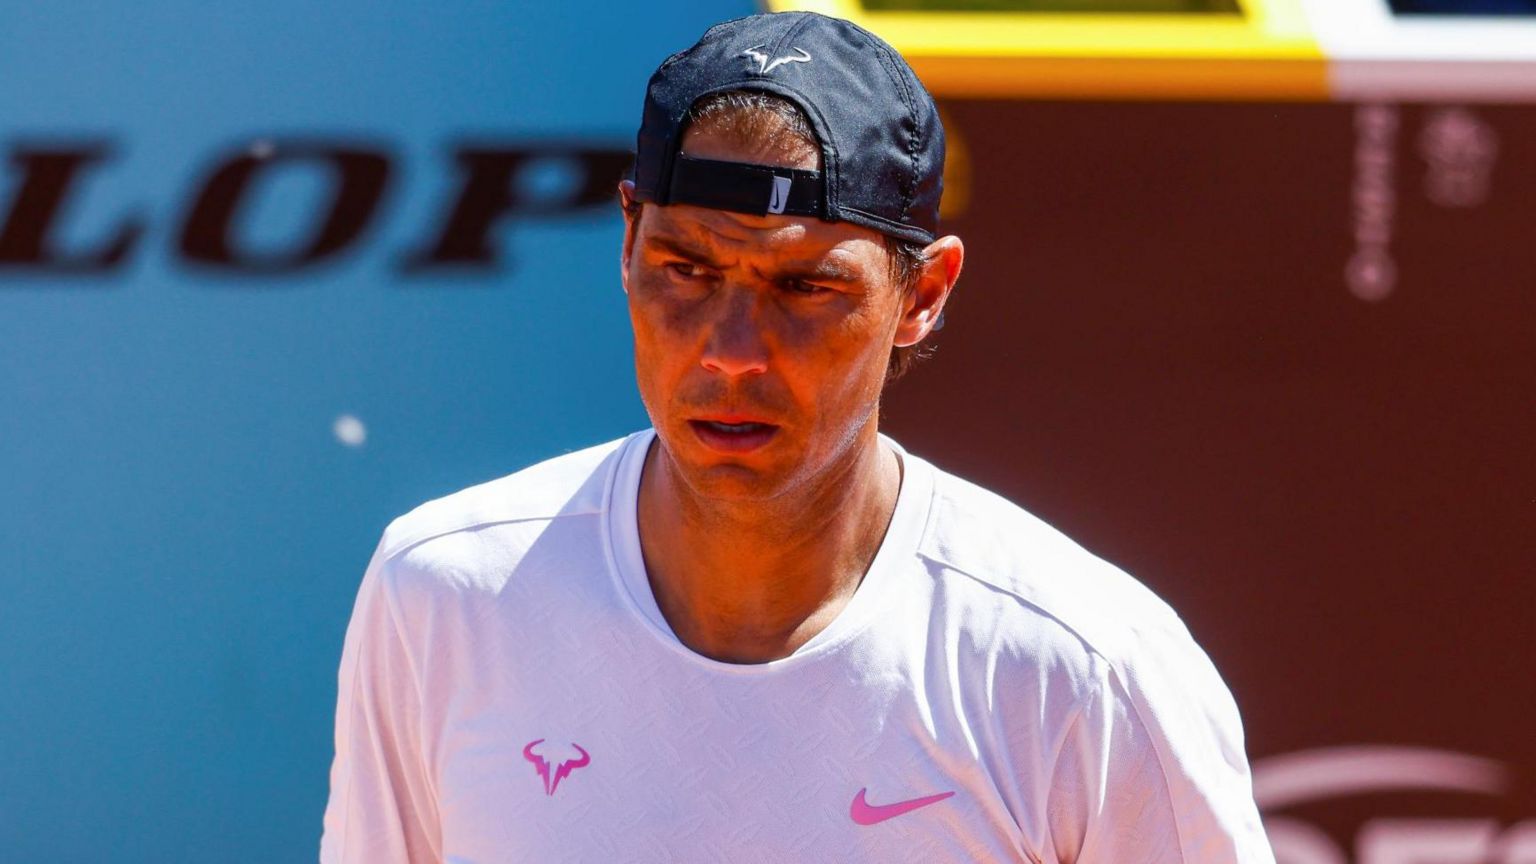 Can Rafael Nadal Overcome Injury for French Open?